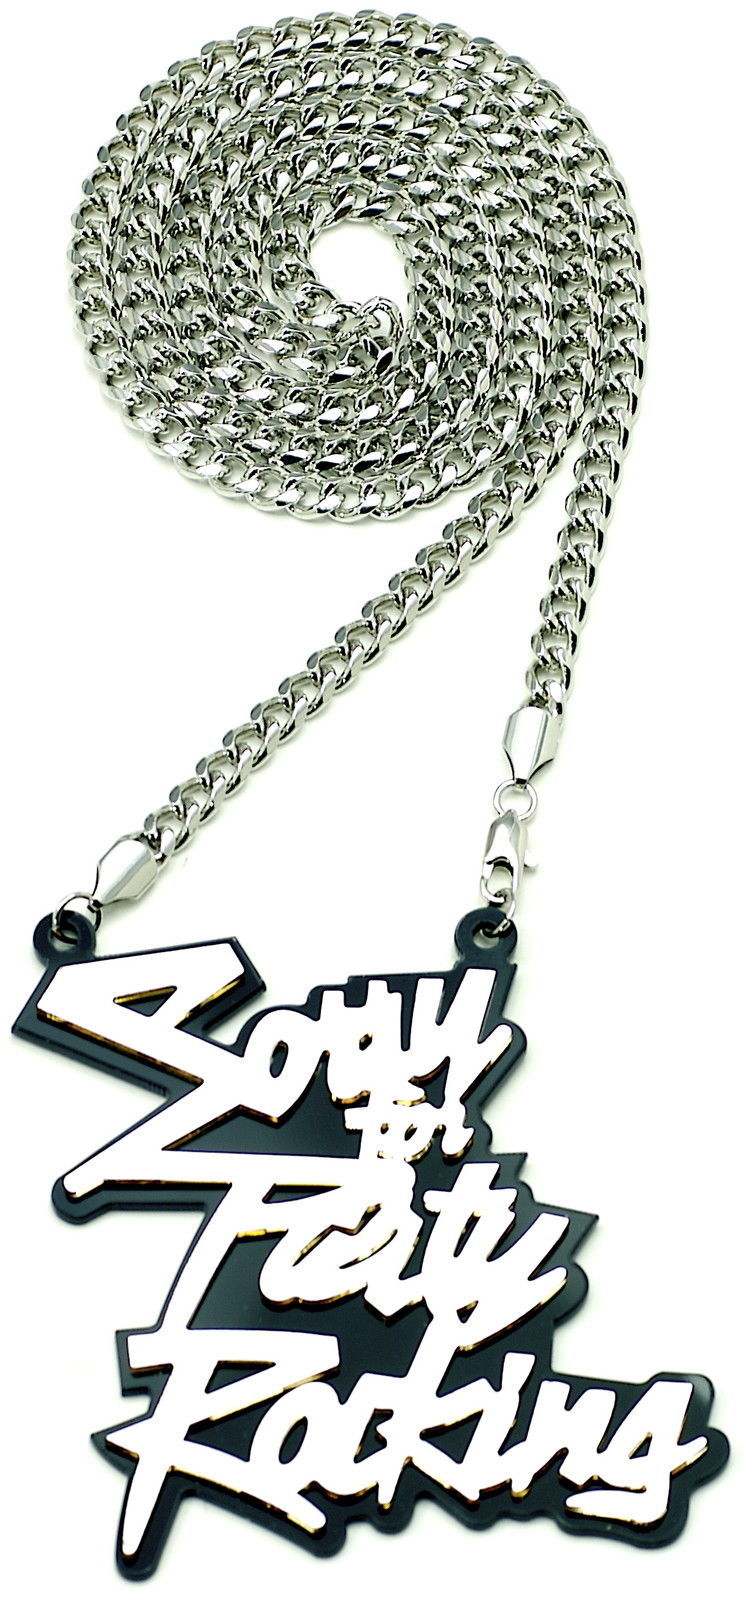 Primary image for Sorry For Party Rocking Necklace Reflective Acrylic 36 Inch Cuban Chain